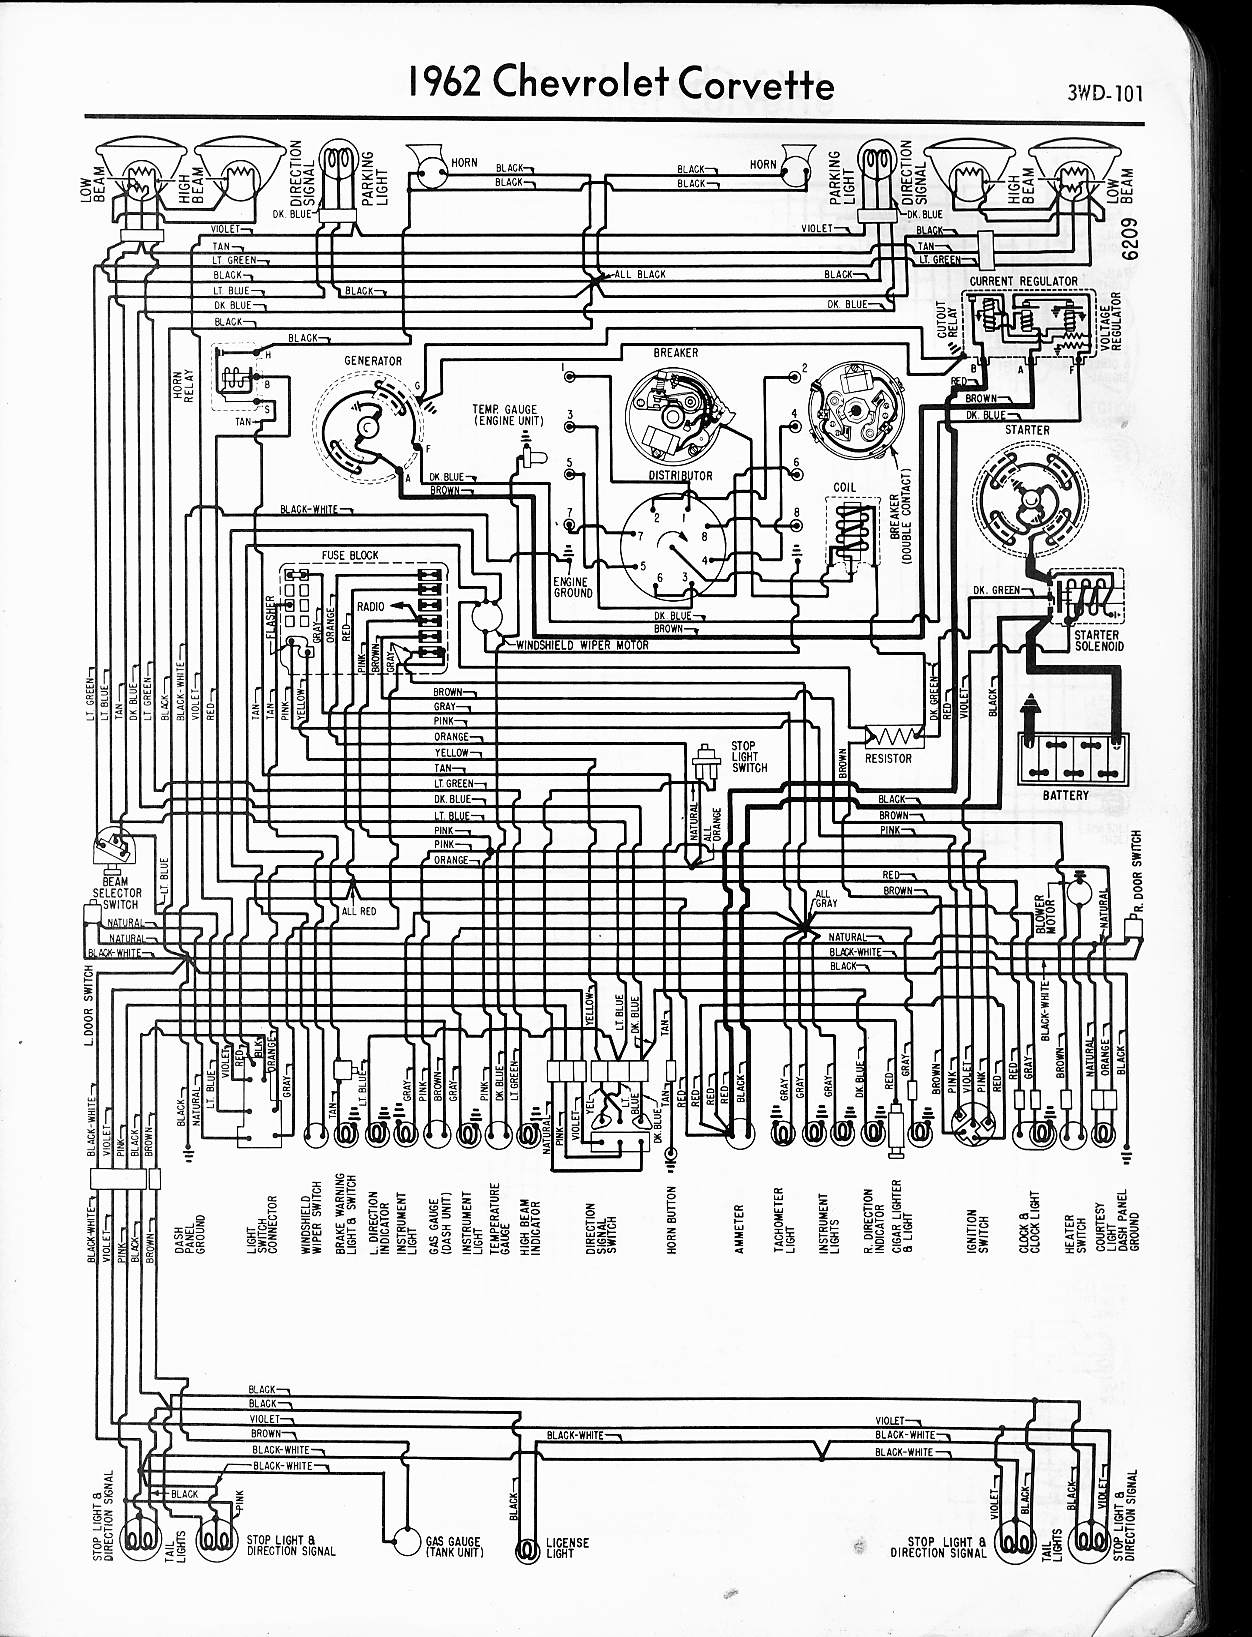 2000 Impala Headlight Wiring Diagram from www.oldcarmanualproject.com